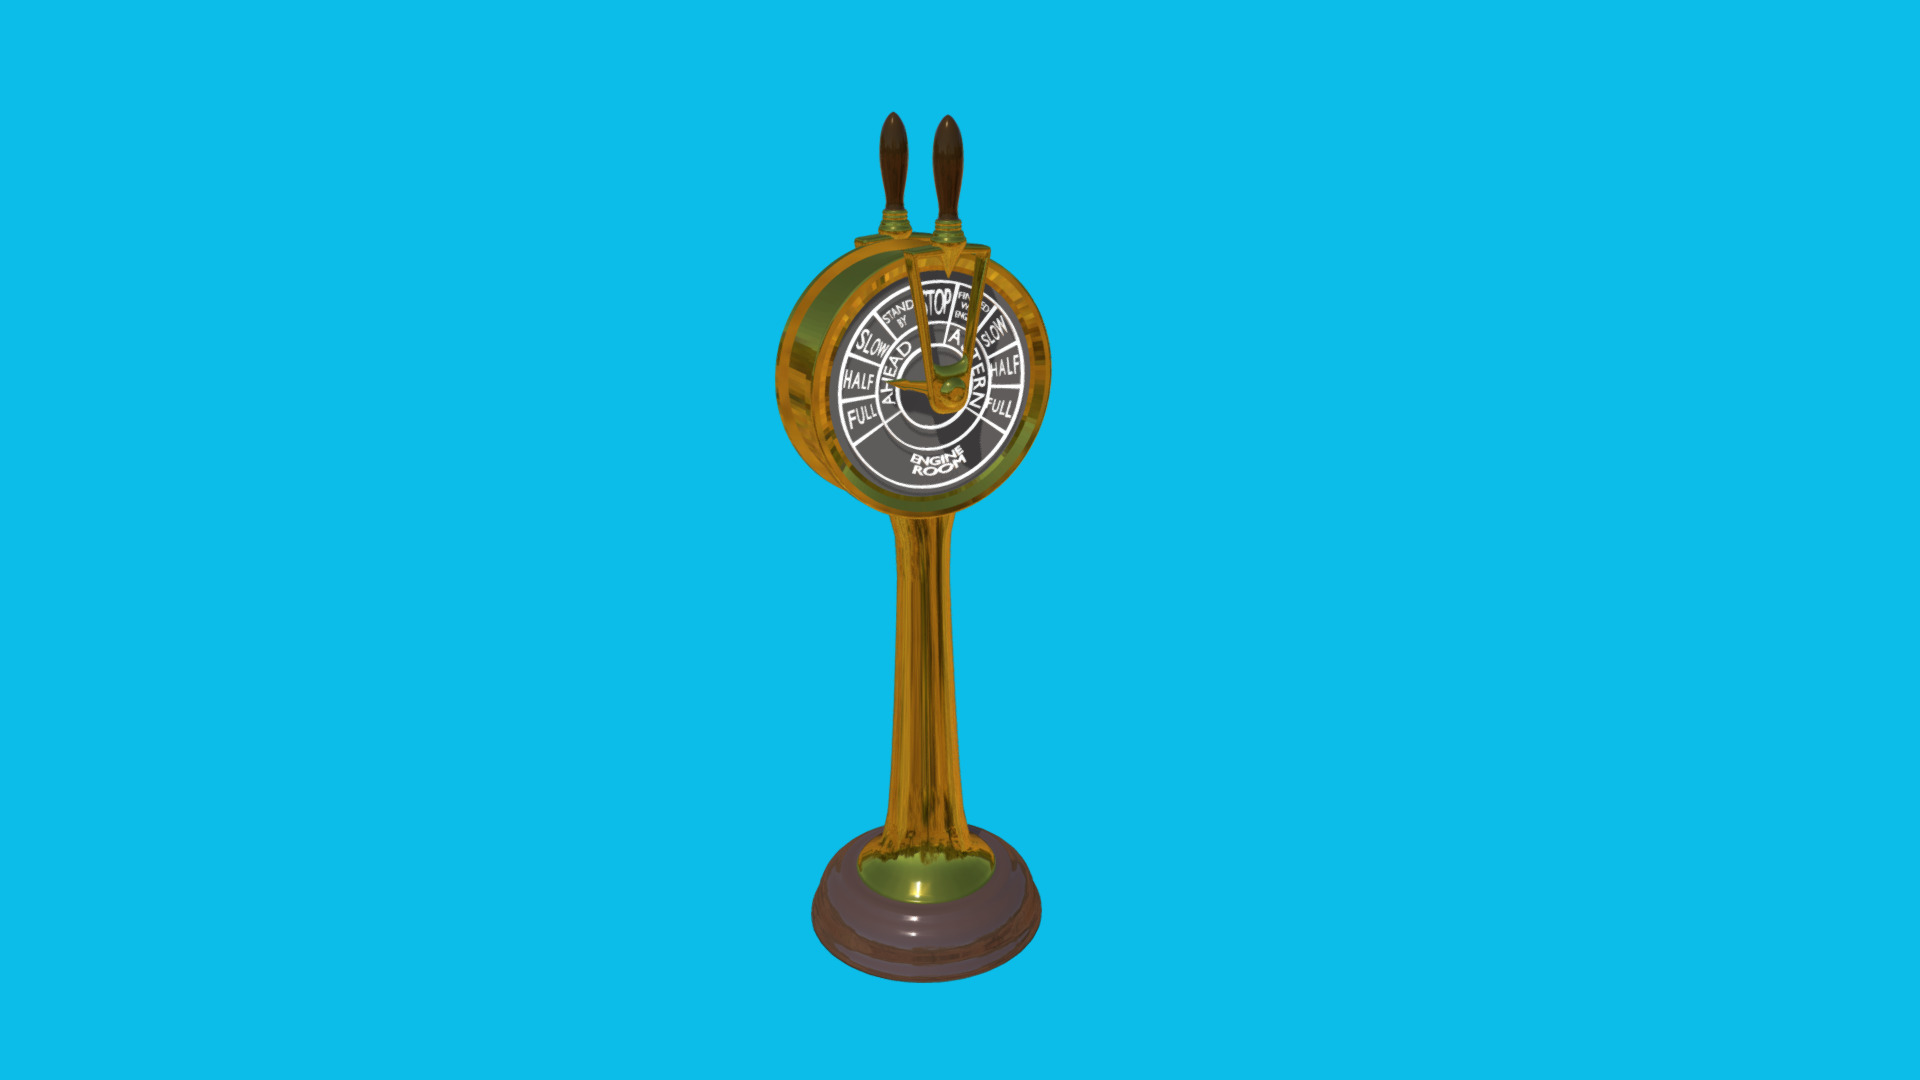 3D model Engine Order Telegraph - This is a 3D model of the Engine Order Telegraph. The 3D model is about a gold trophy with a blue background.